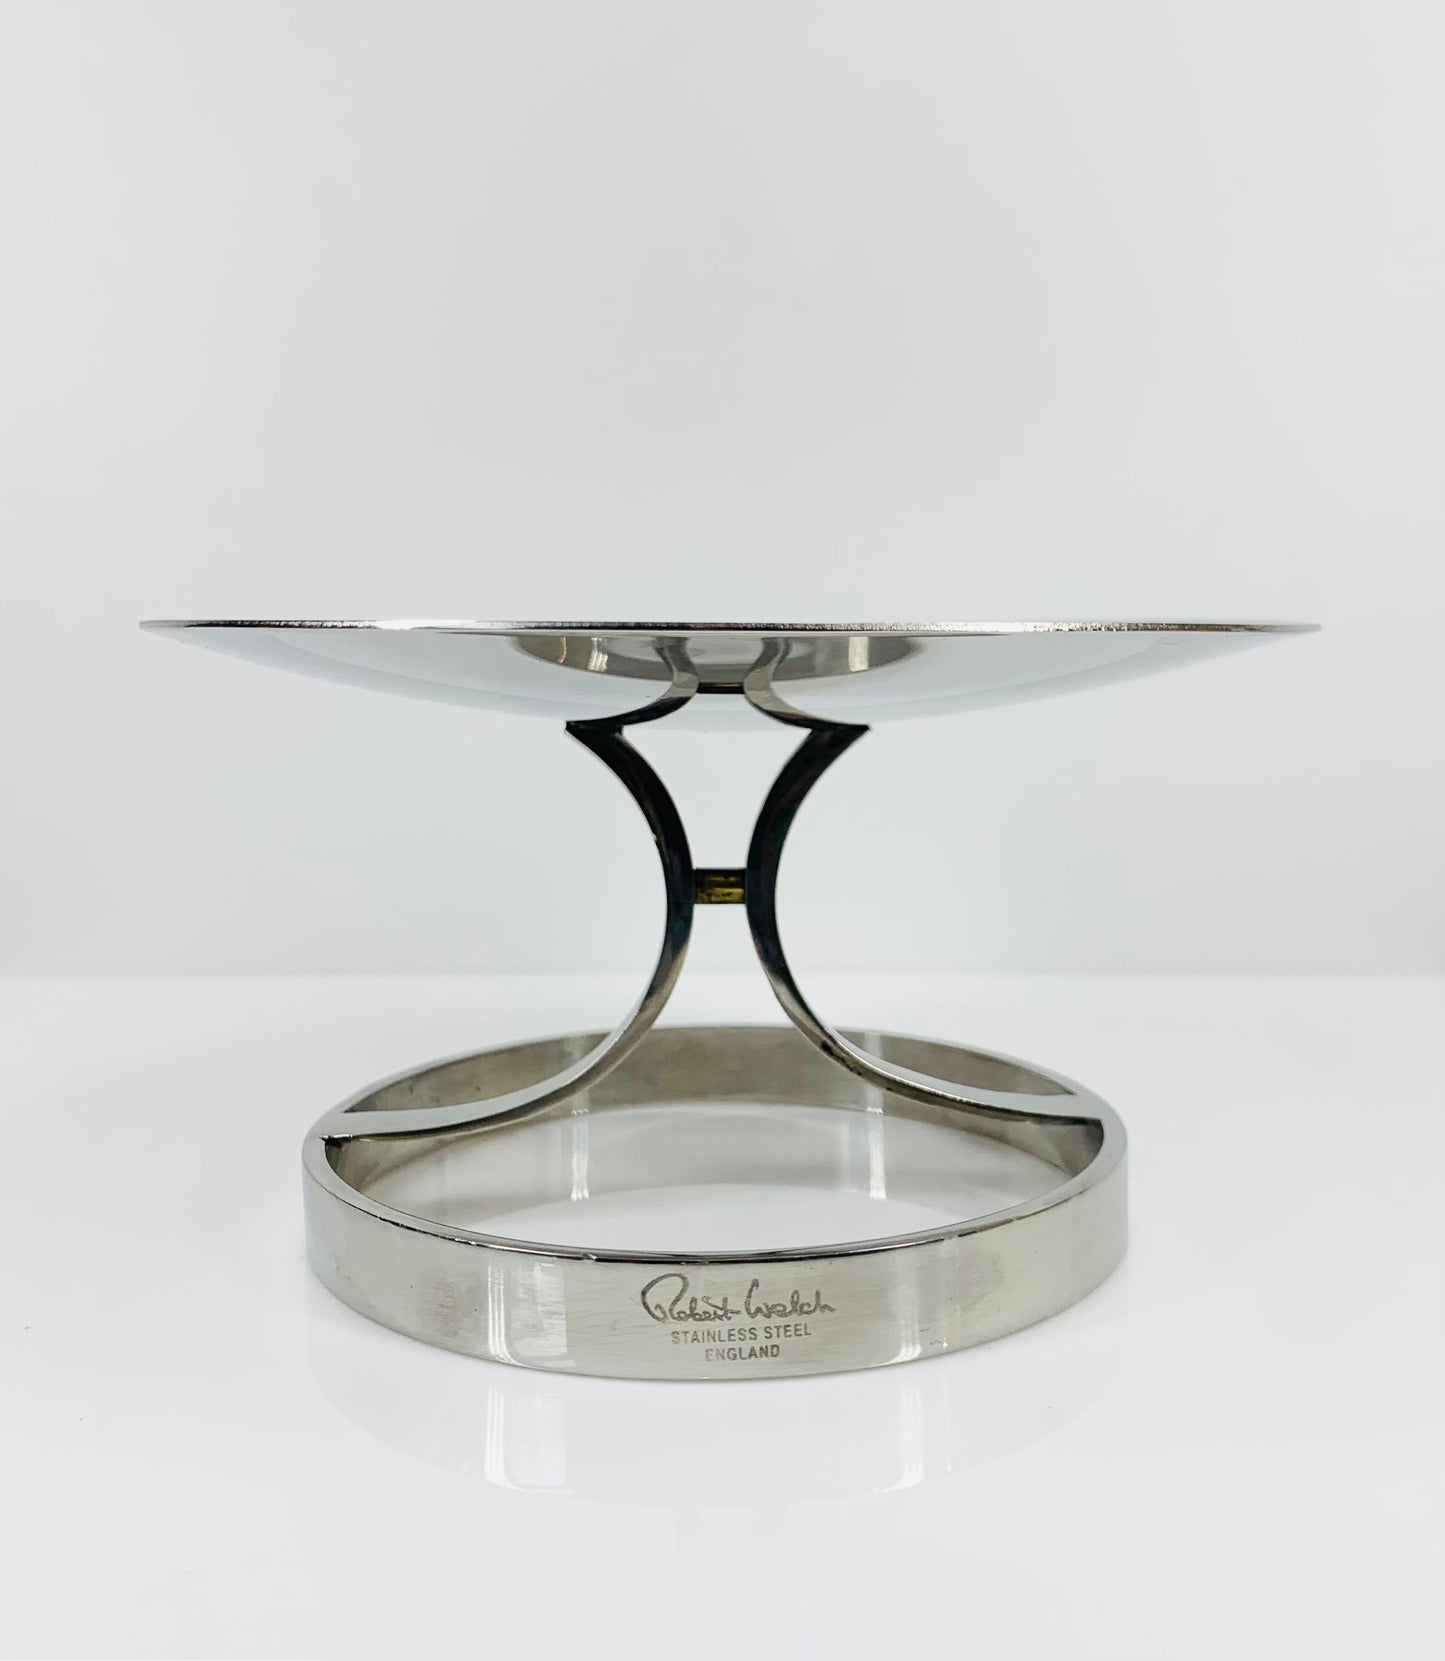 Midcentury stainless steel candle holder by David Welch